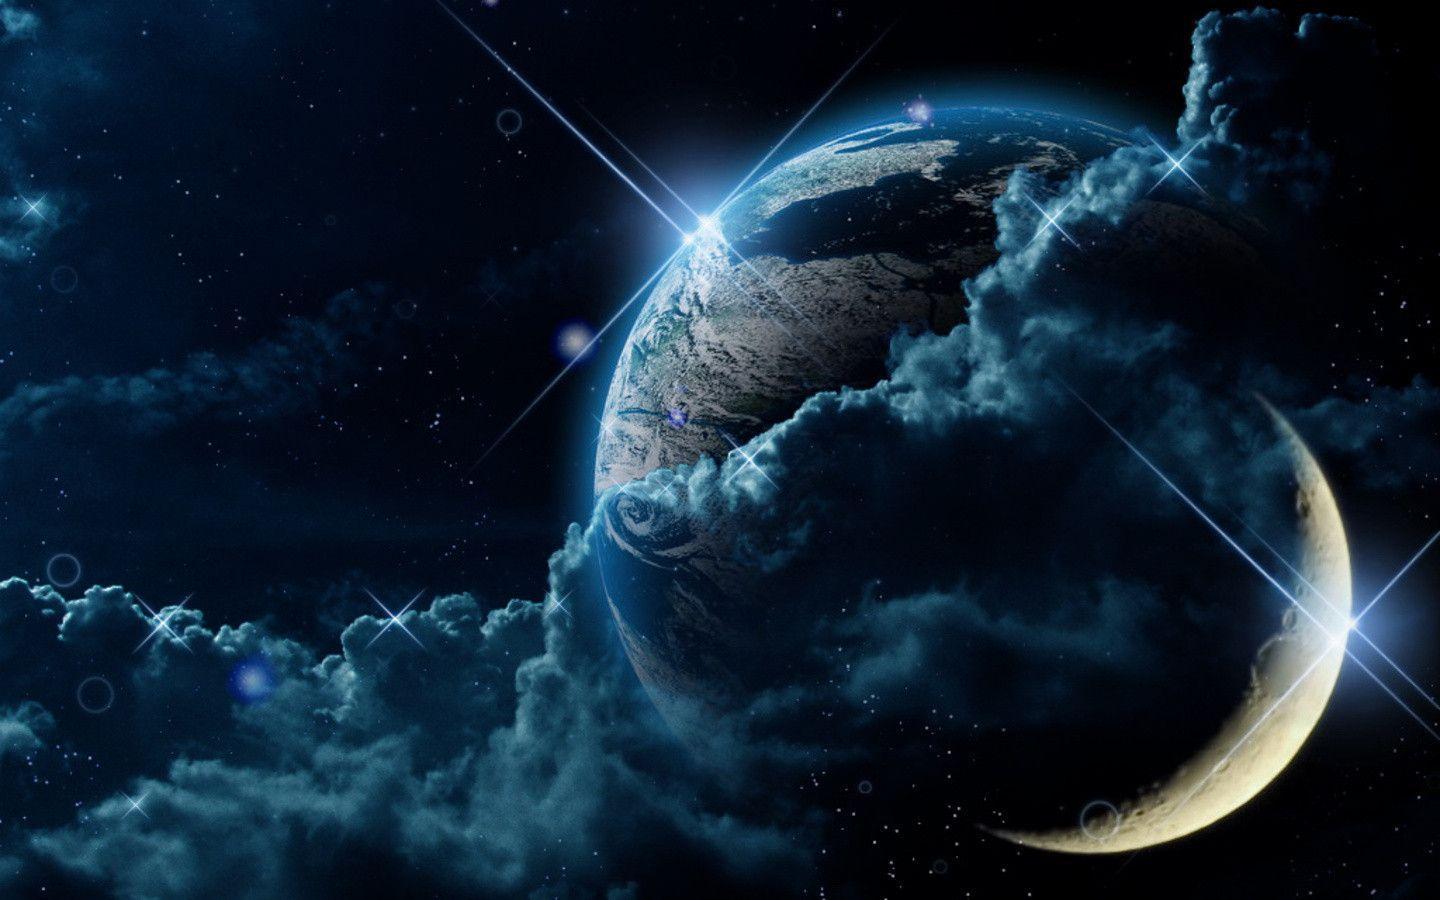 Download Fantasy Mysterious Space Free Wallpaper 1440x900. Full